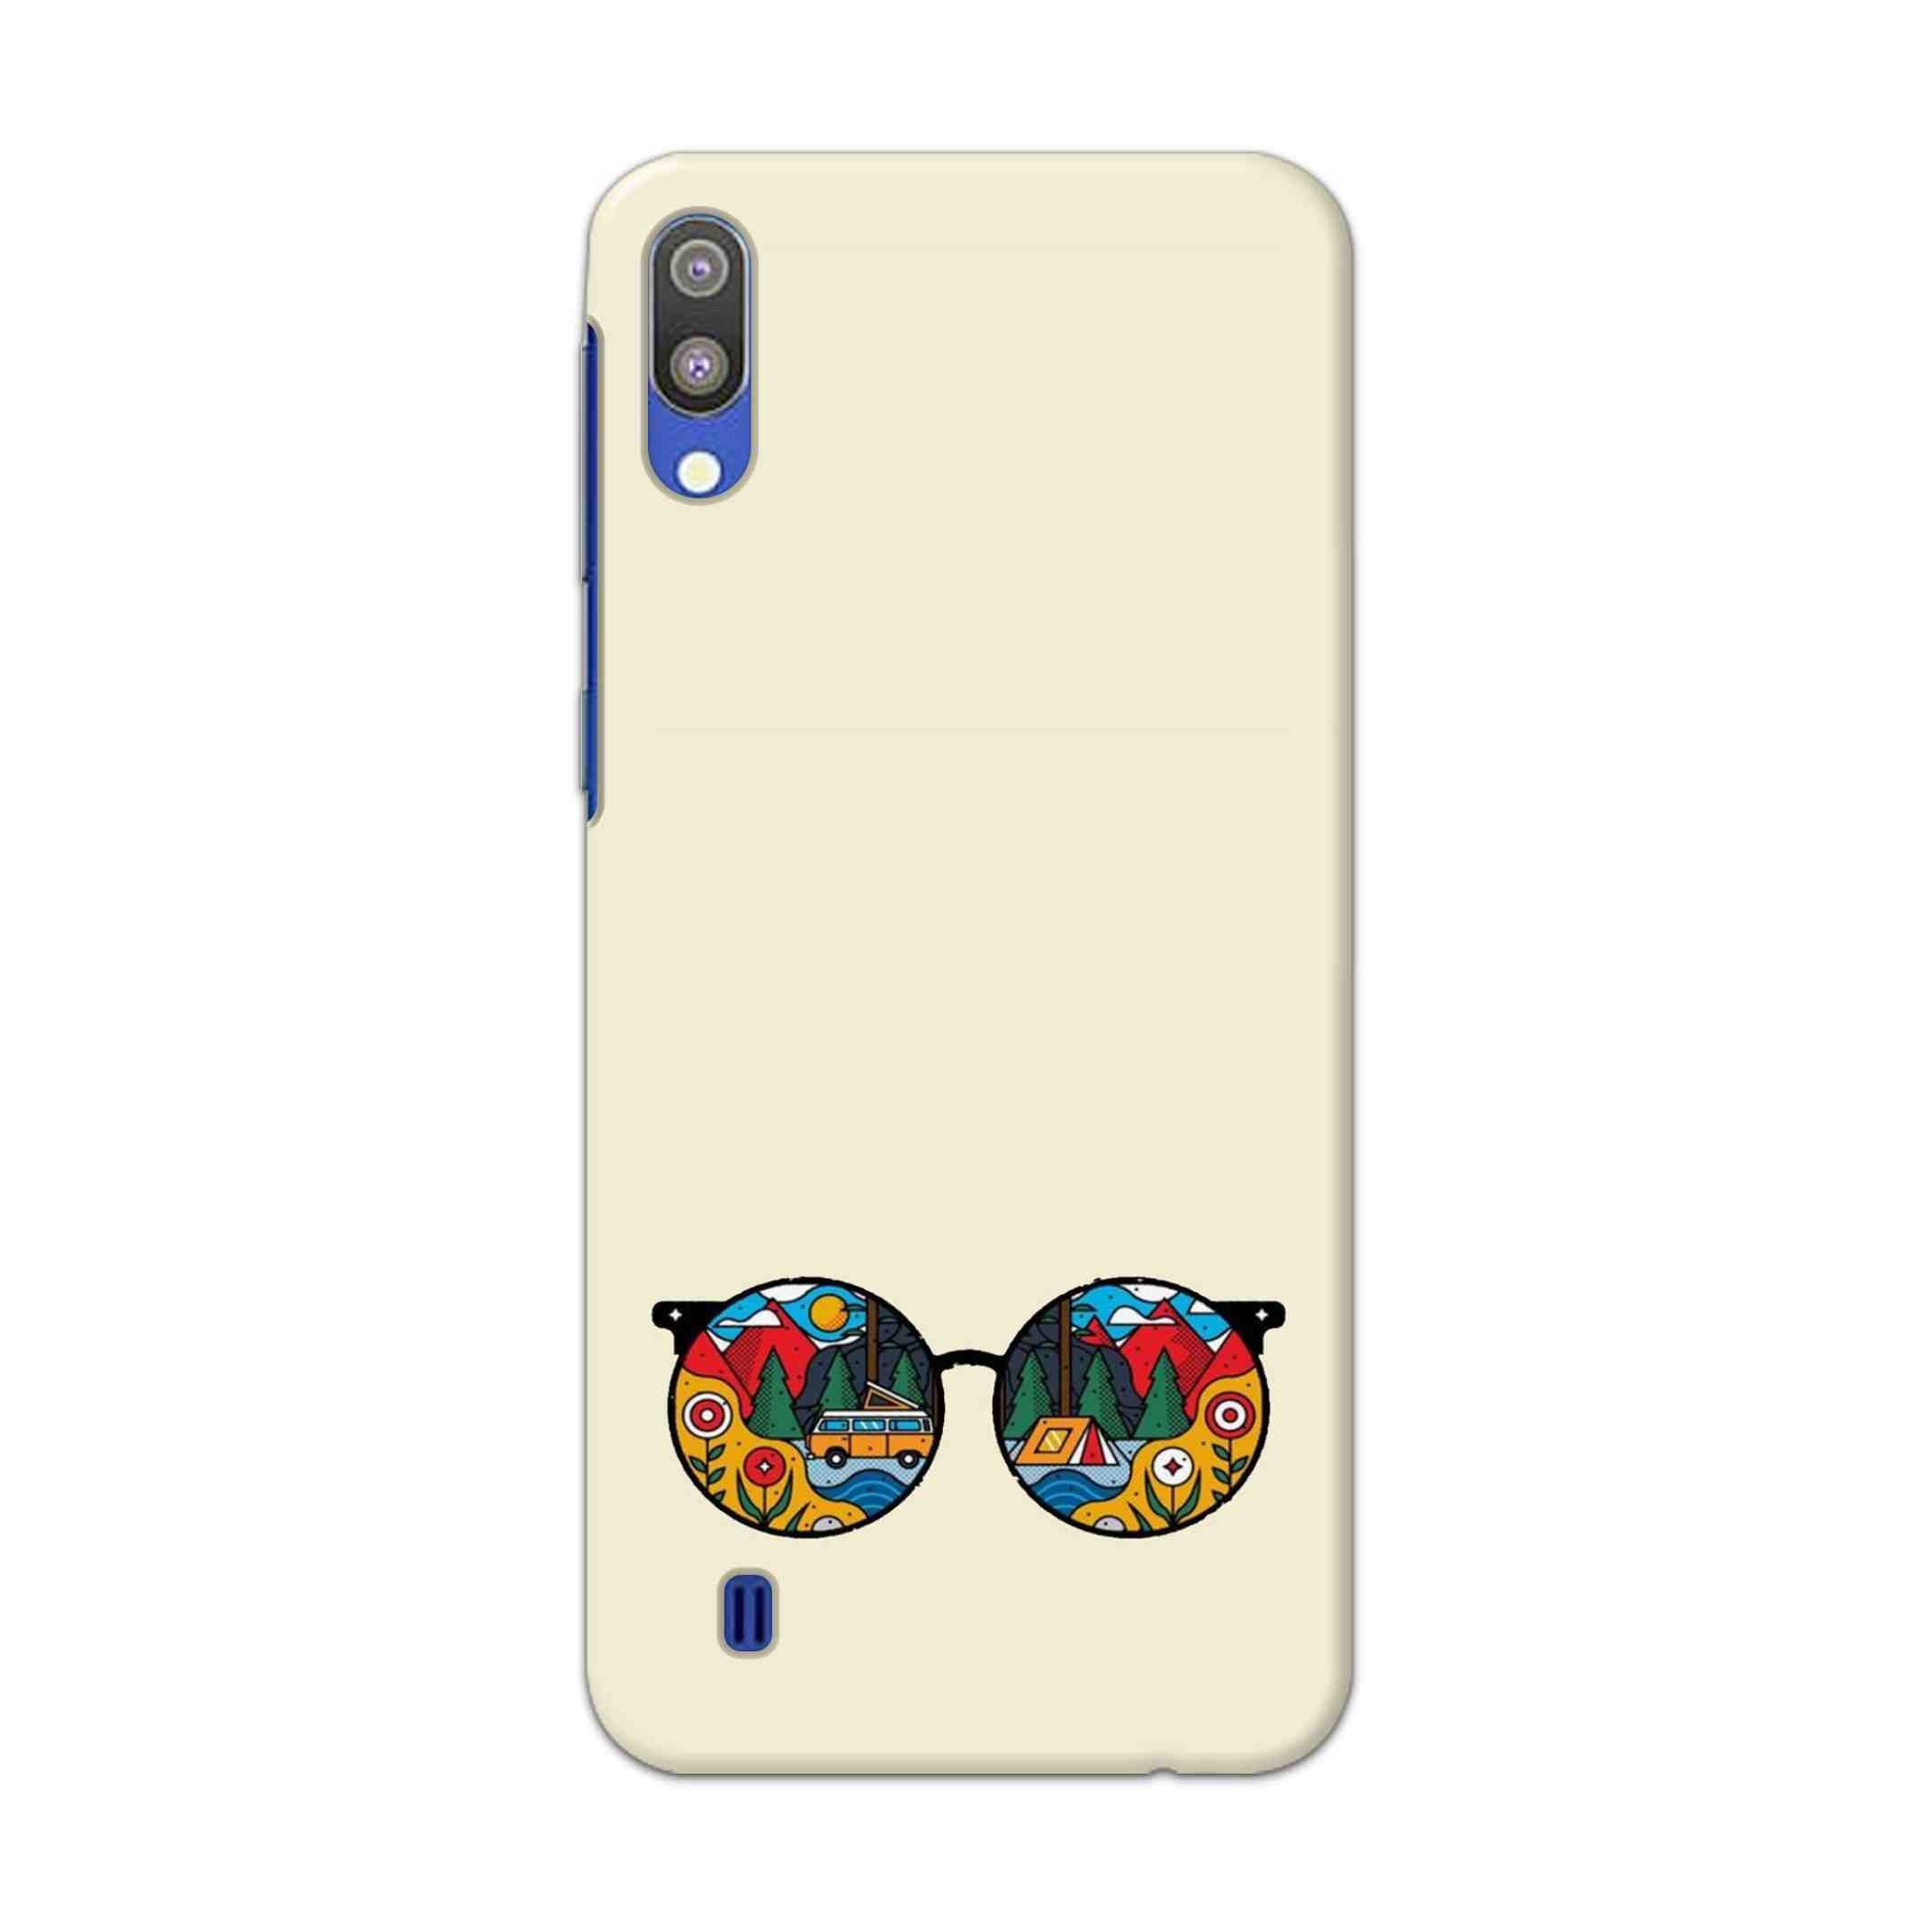 Buy Rainbow Sunglasses Hard Back Mobile Phone Case Cover For Samsung Galaxy M10 Online